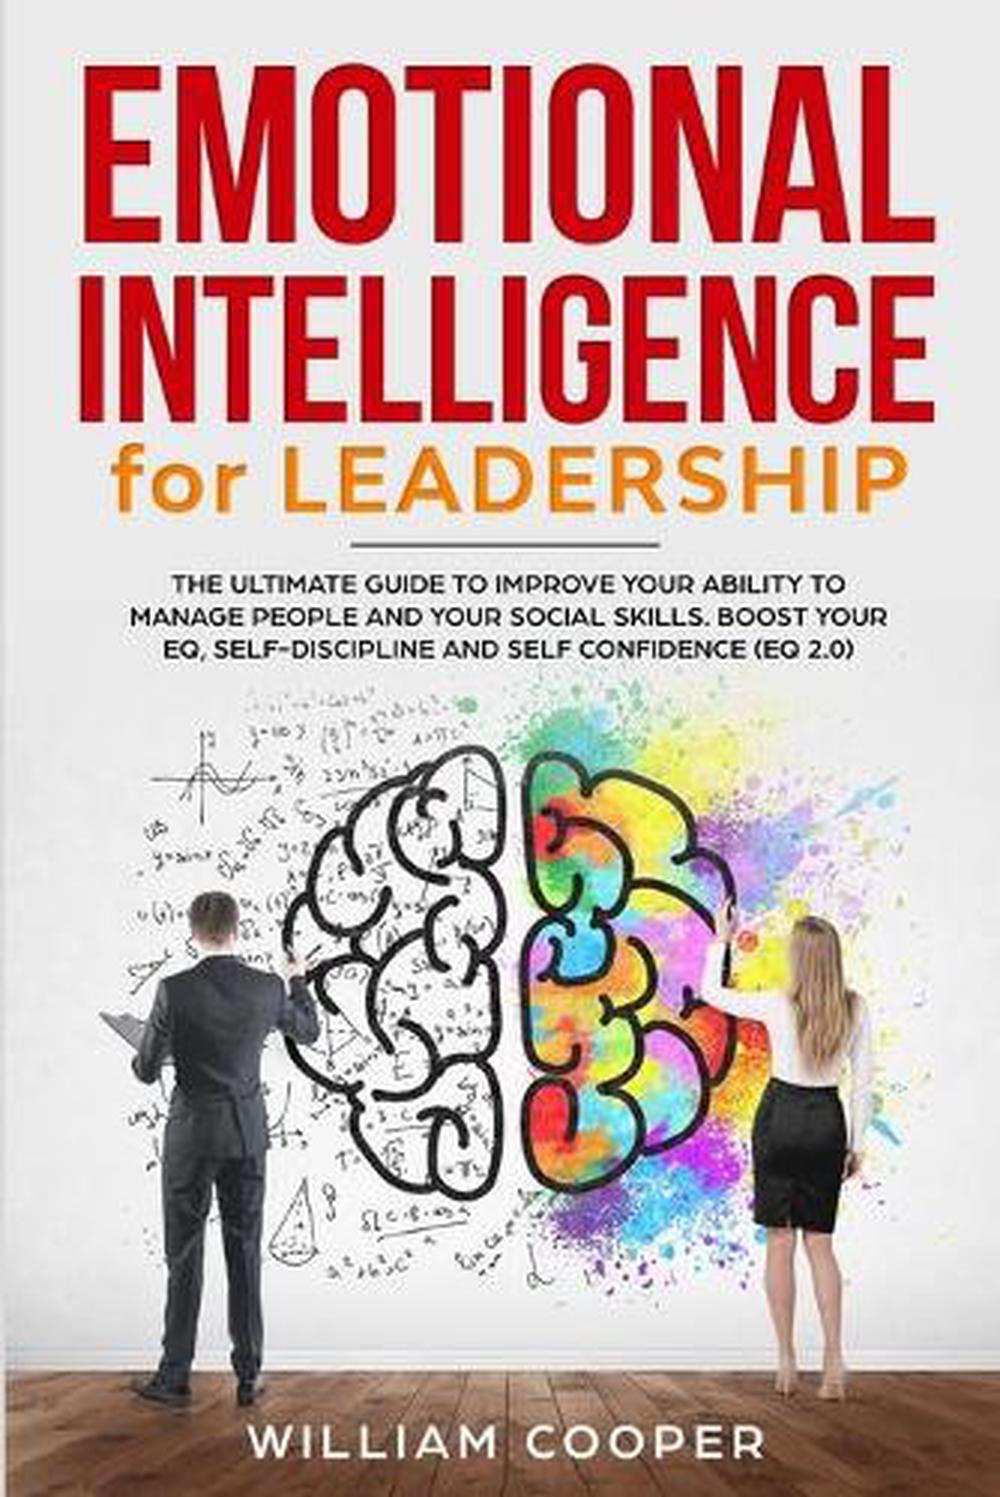 emotional intelligence and leadership research paper